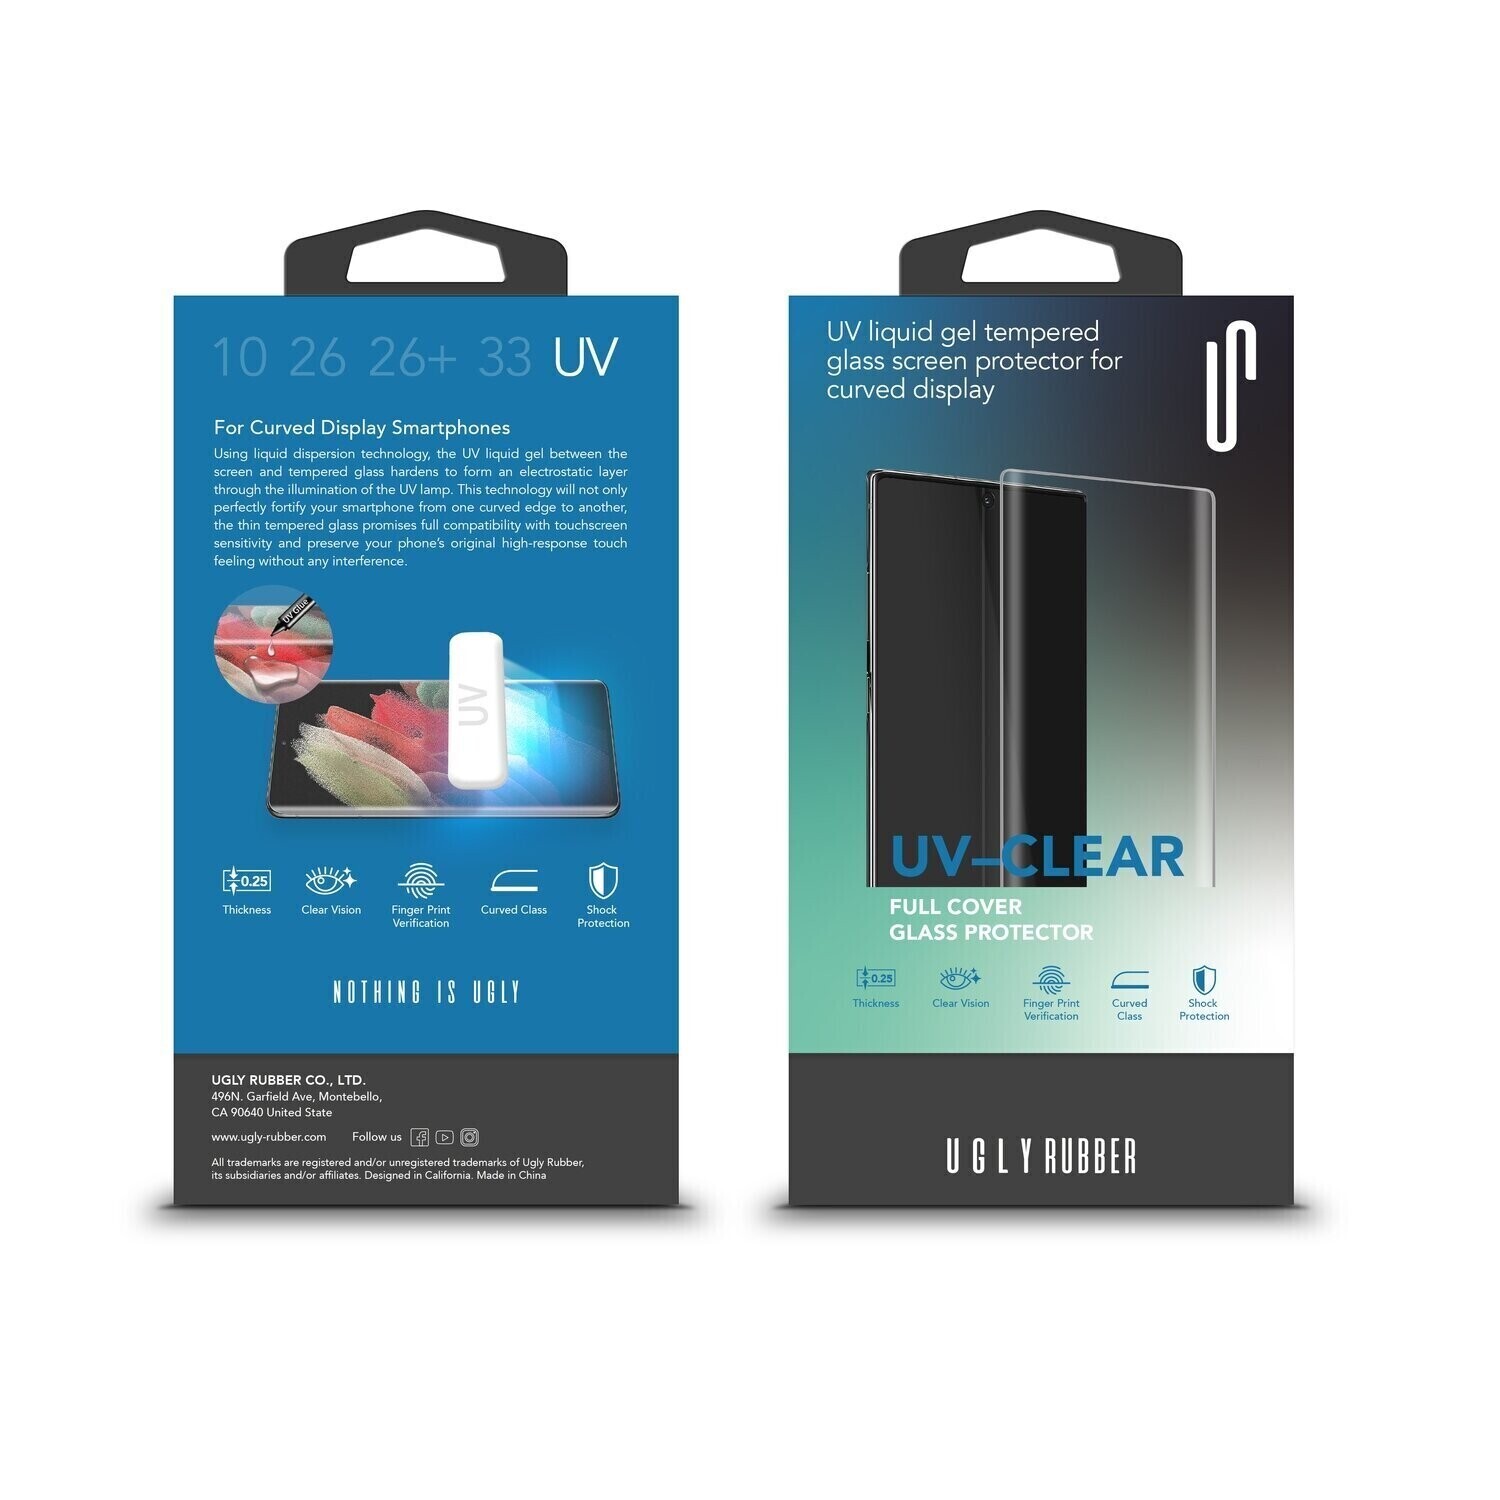 Ugly Rubber Oneplus 8 UV Liquid Gel Tempered Glass, Clear